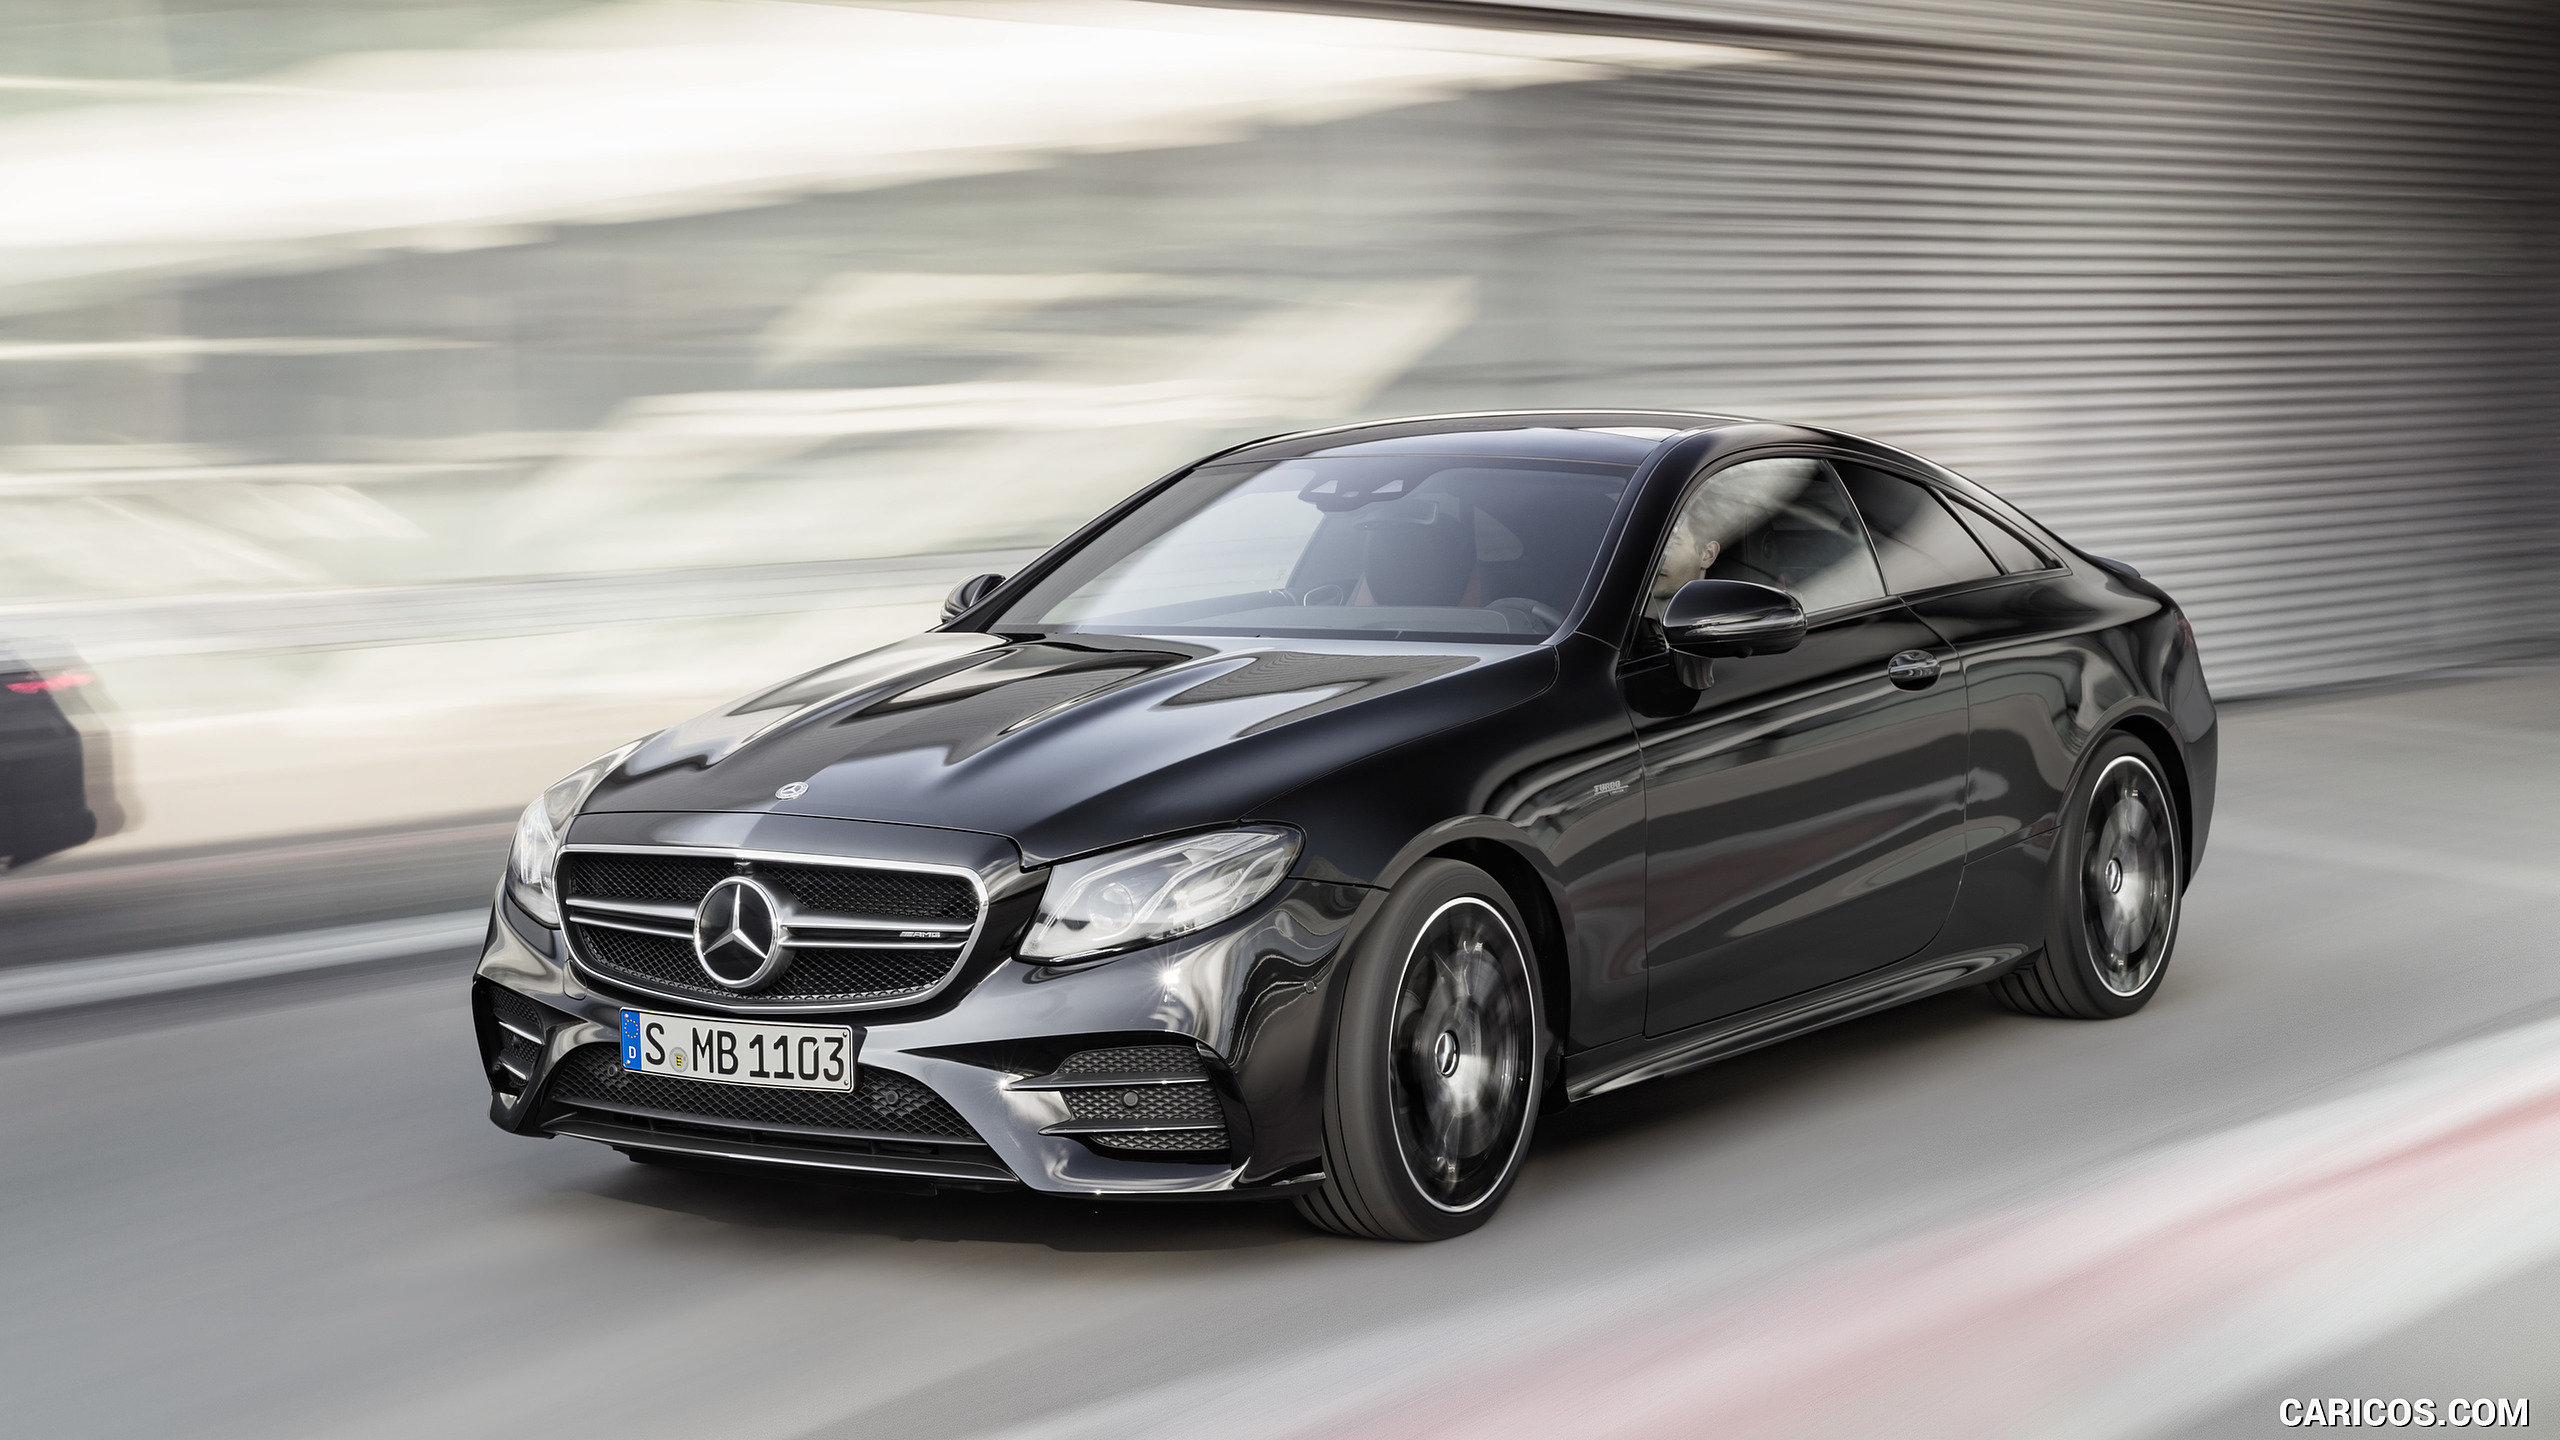 2019 Mercedes-AMG E 53 Coupe 4MATIC+ (Color: Obsidian Black Metallic) - Front Three-Quarter, #1 of 193